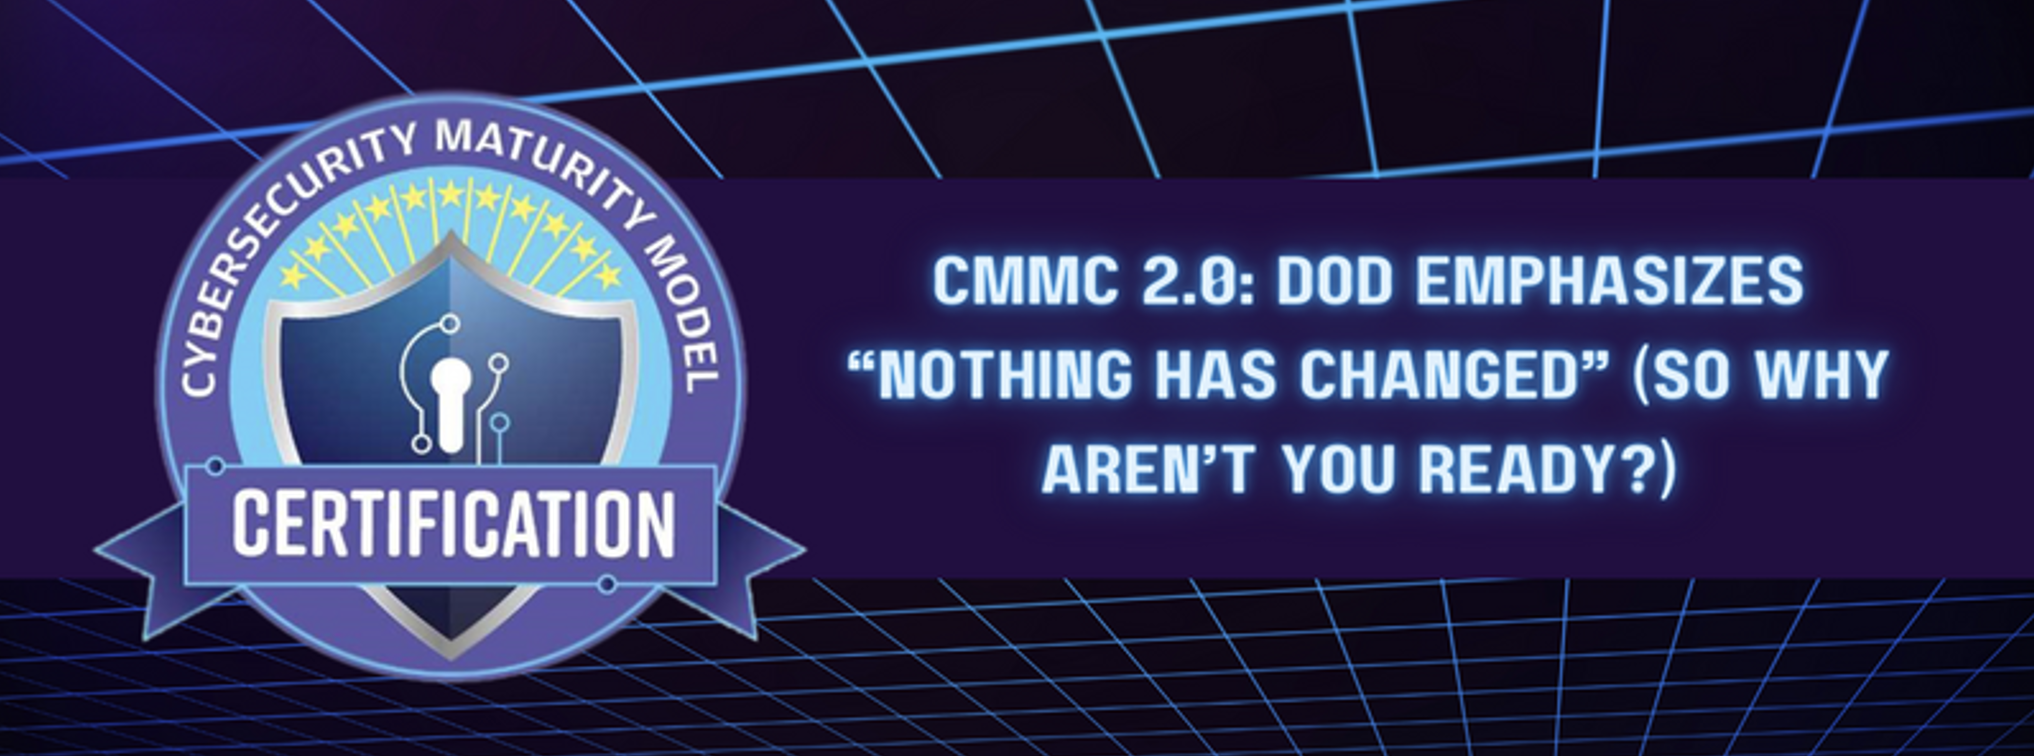 CMMC 2.0: DoD Emphasizes “Nothing Has Changed” (So Why Aren’t You Ready?)